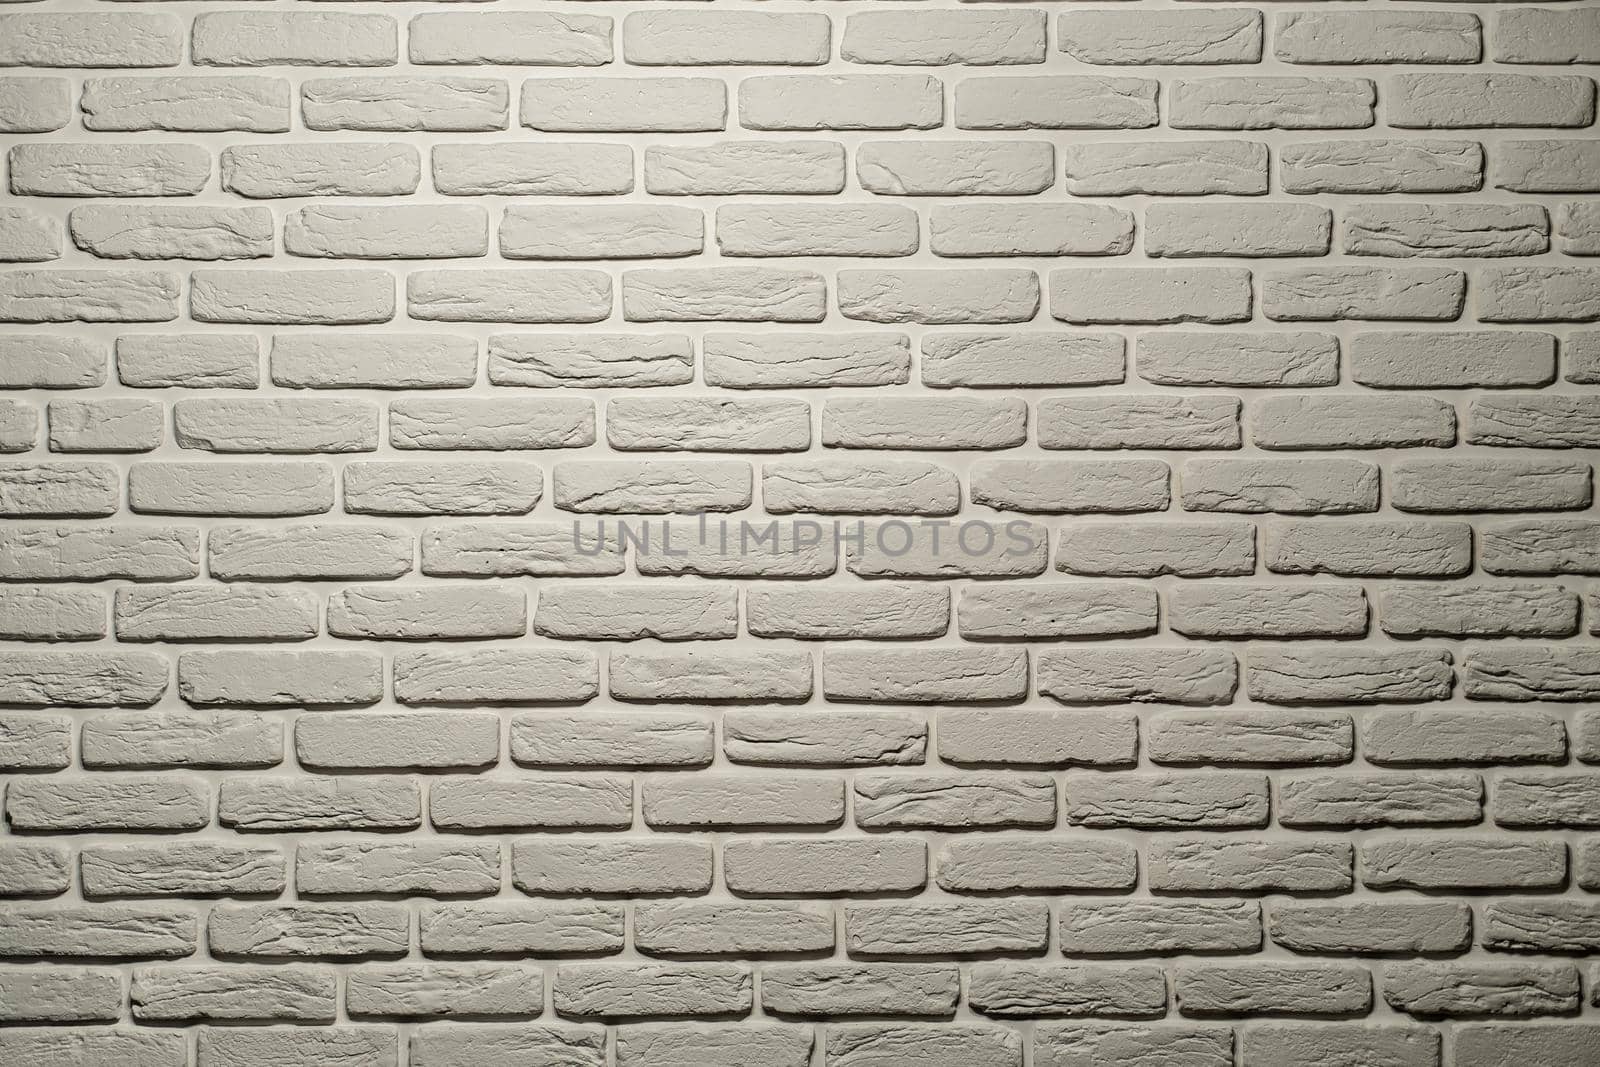 White brick wall of a warm shade lit from above by a lamp. White brick wall, perfect as a background, square photograph. The brick background is white with a warm shade